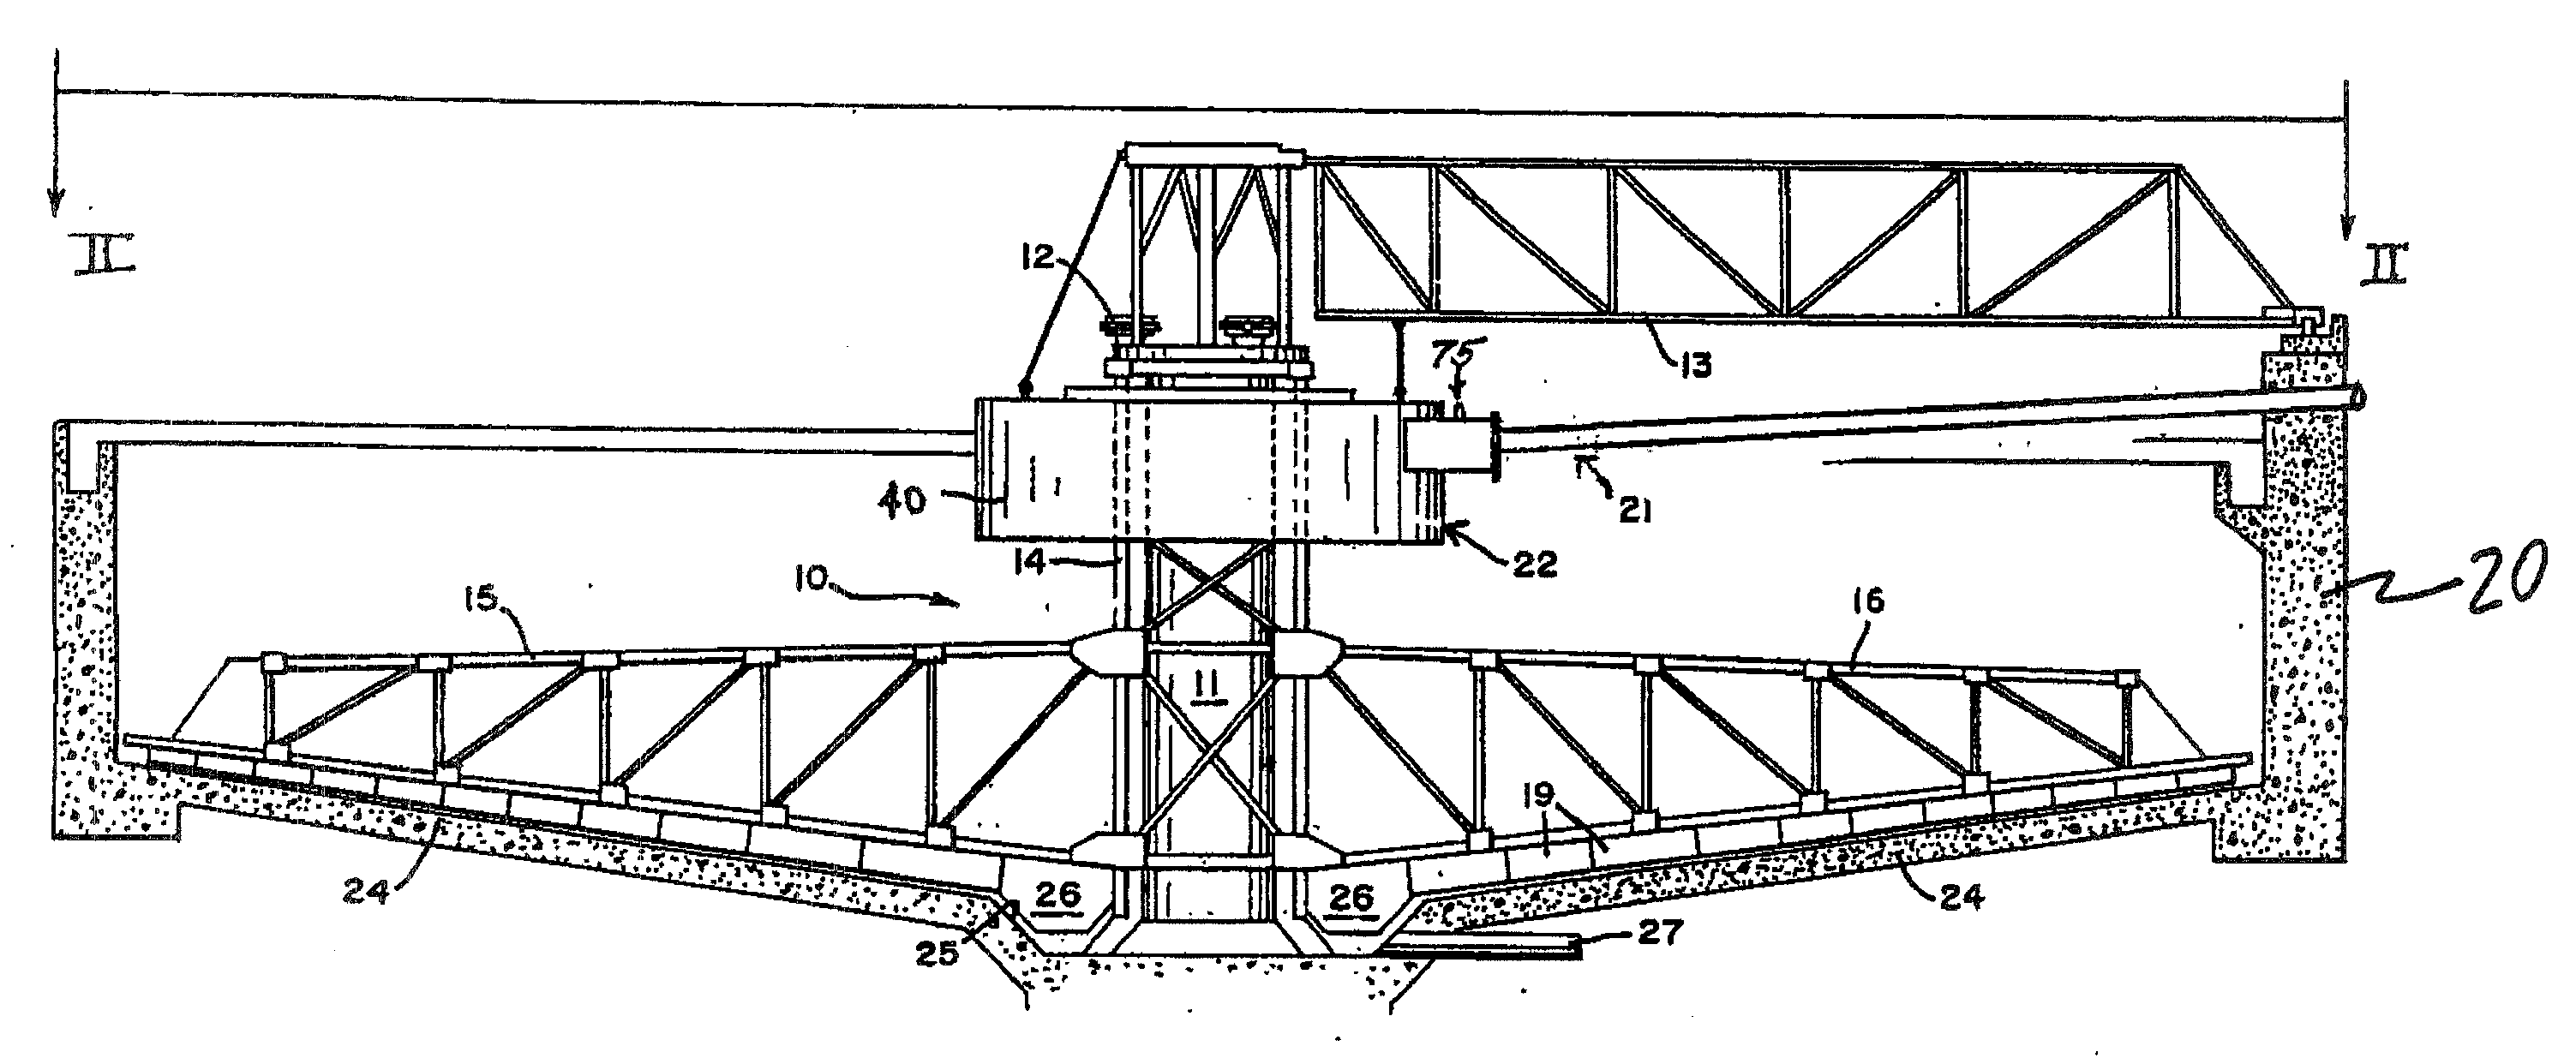 Open-channel feed dilution system for a thickener or settling tank